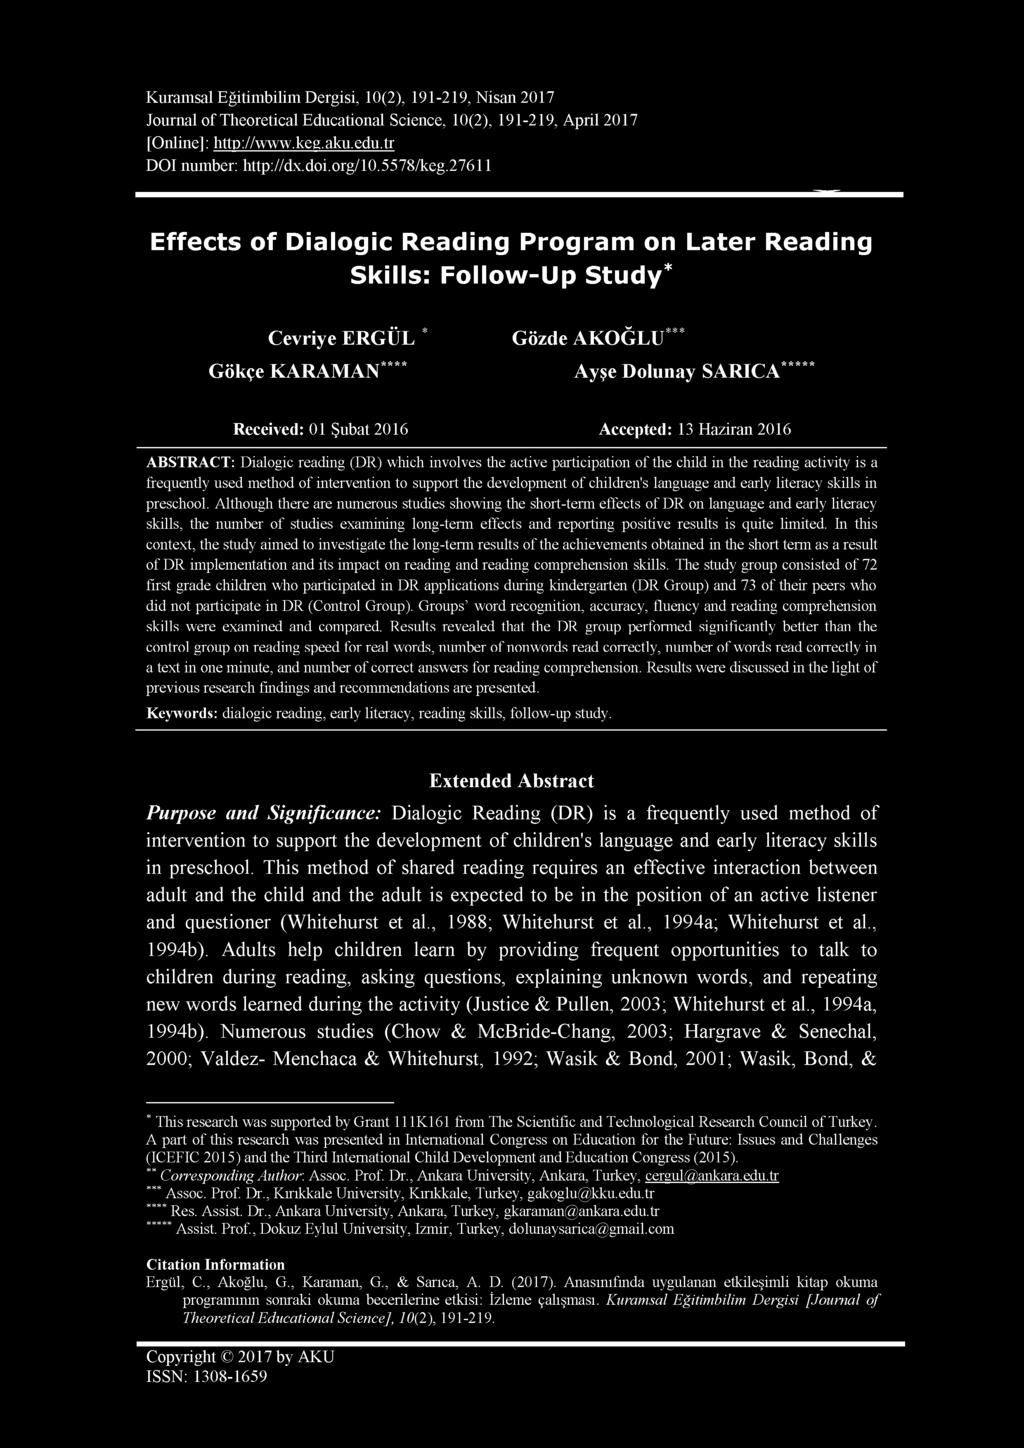 .. Received: 01 Şubat 2016 Accepted: 13 Haziran 2016 ABSTRACT: Dialogic reading (DR) which involves the active participation of the child in the reading activity is a frequently used method of